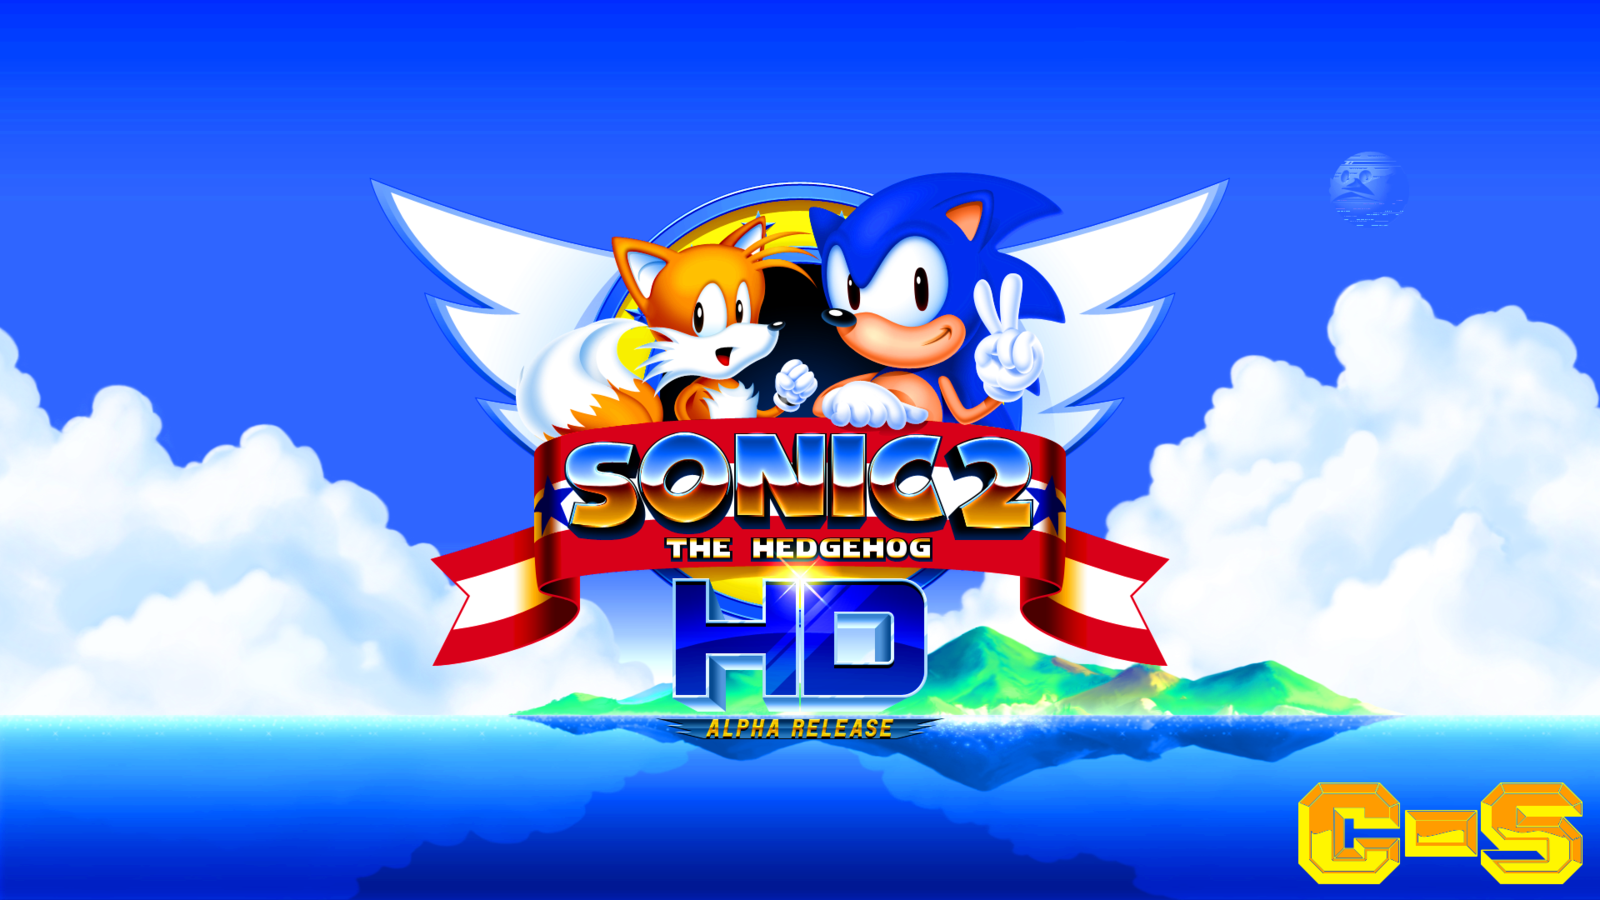 Sonic T H HD Wallpaper By Classic